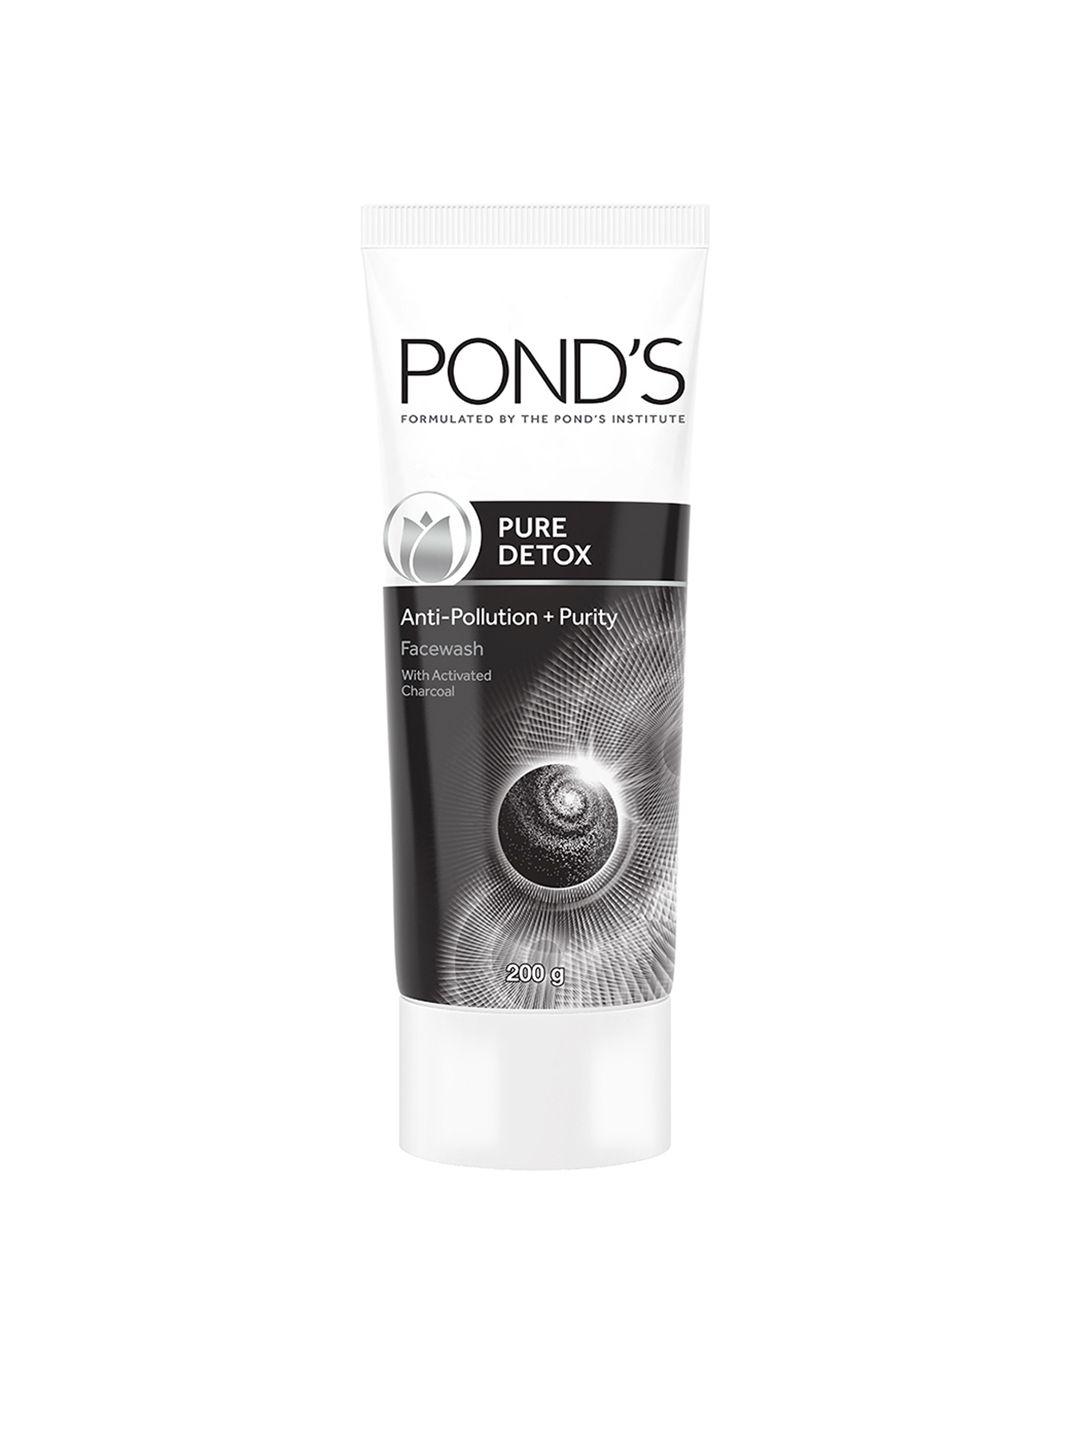 pond's-pure-white-anti-pollution-activated-charcoal-face-wash-200-gm